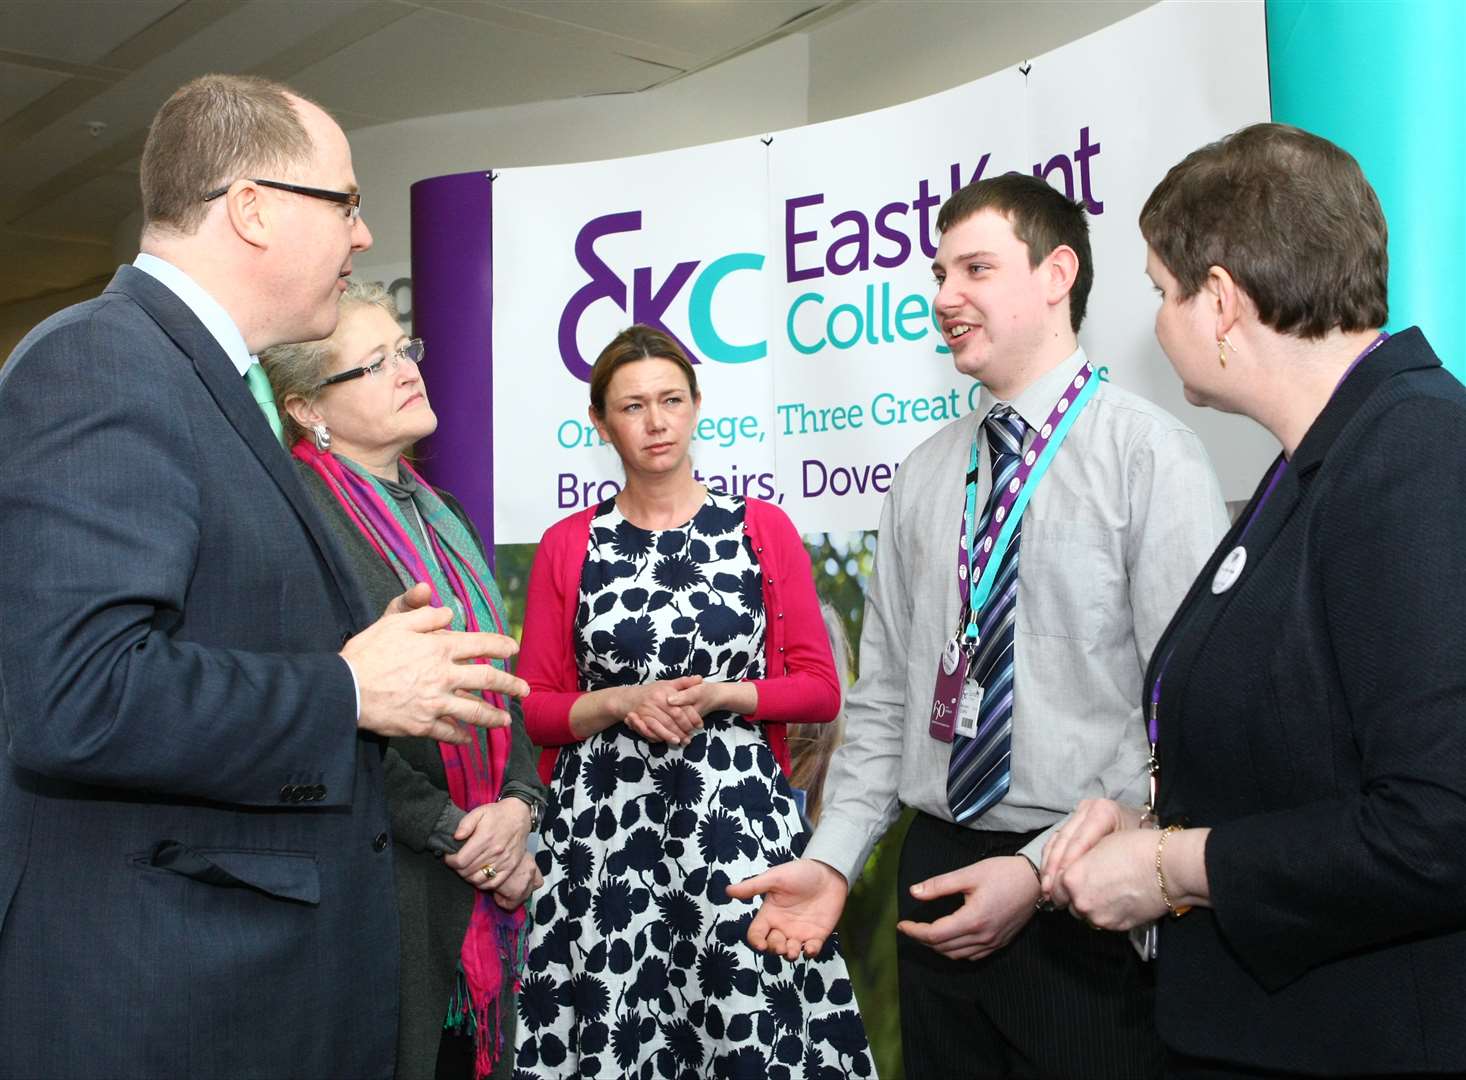 Minister for life sciences George Freeman with MP Laura Sandys, Discovery park project manager Kimberley Anderson and East Kent College's head of apprenticeships Jan Chandler with a young apprentice.